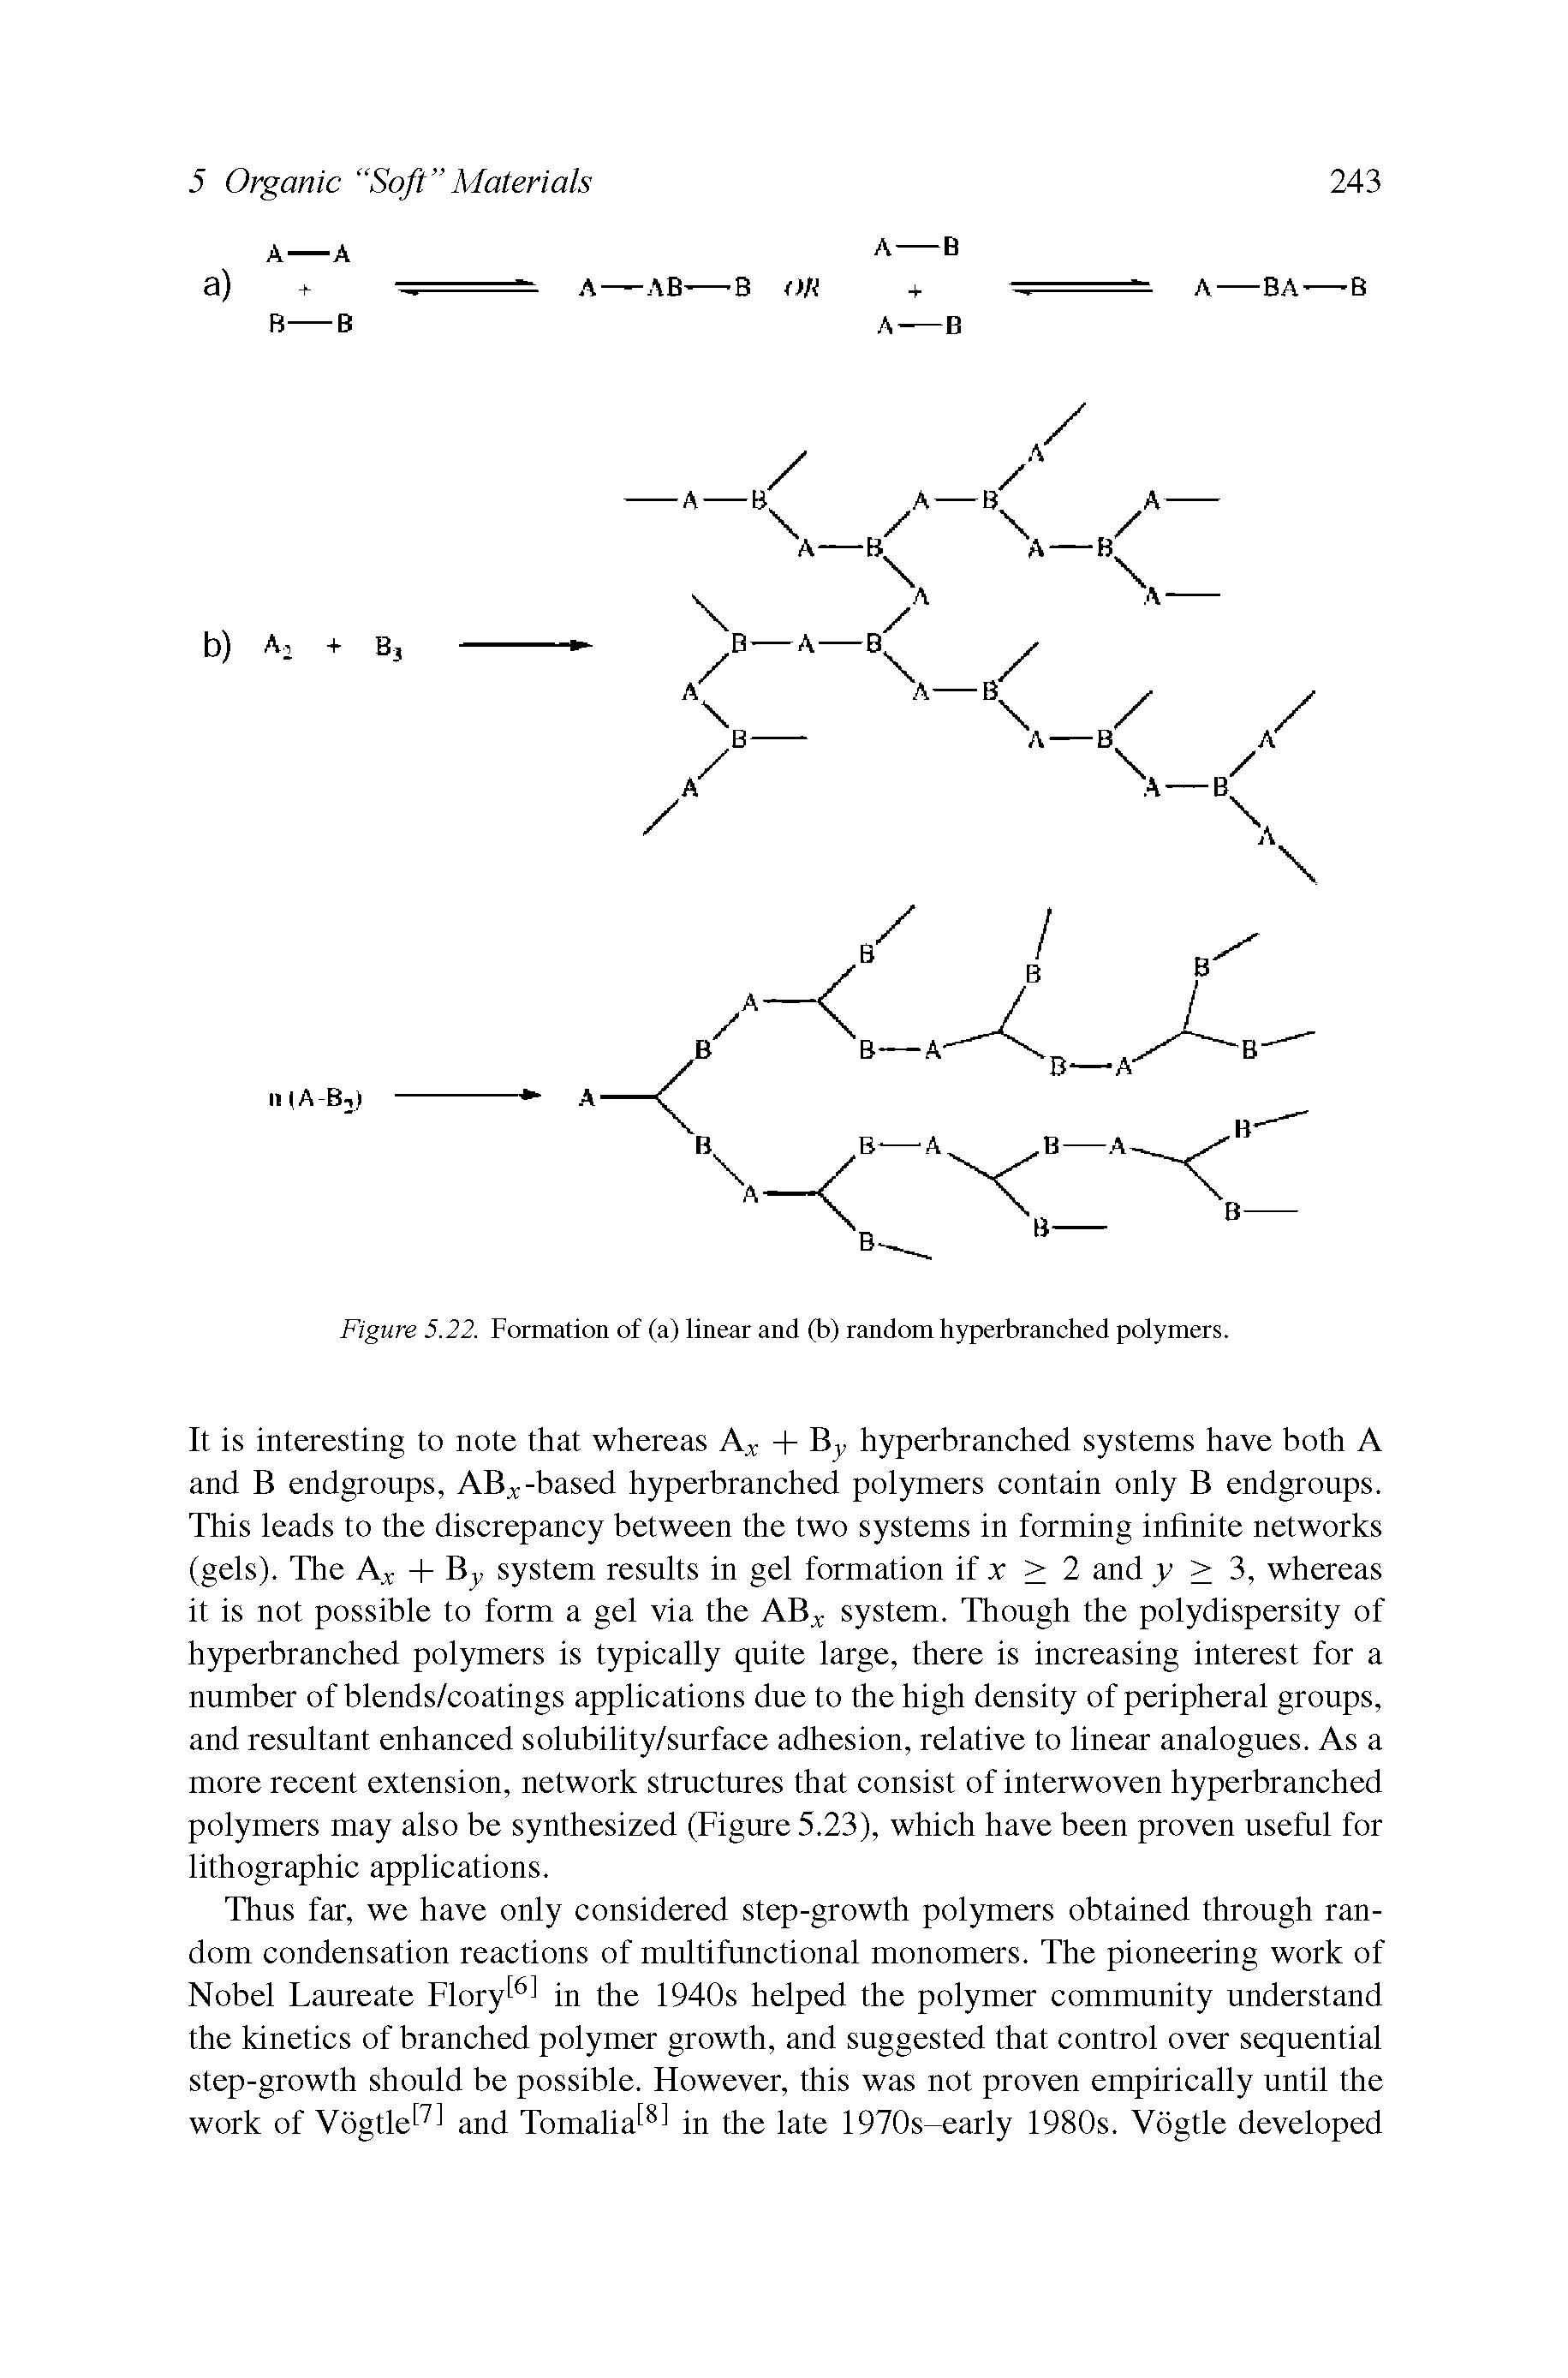 Figure 5.22. Formation of (a) linear and (b) random hyperbranched polymers.